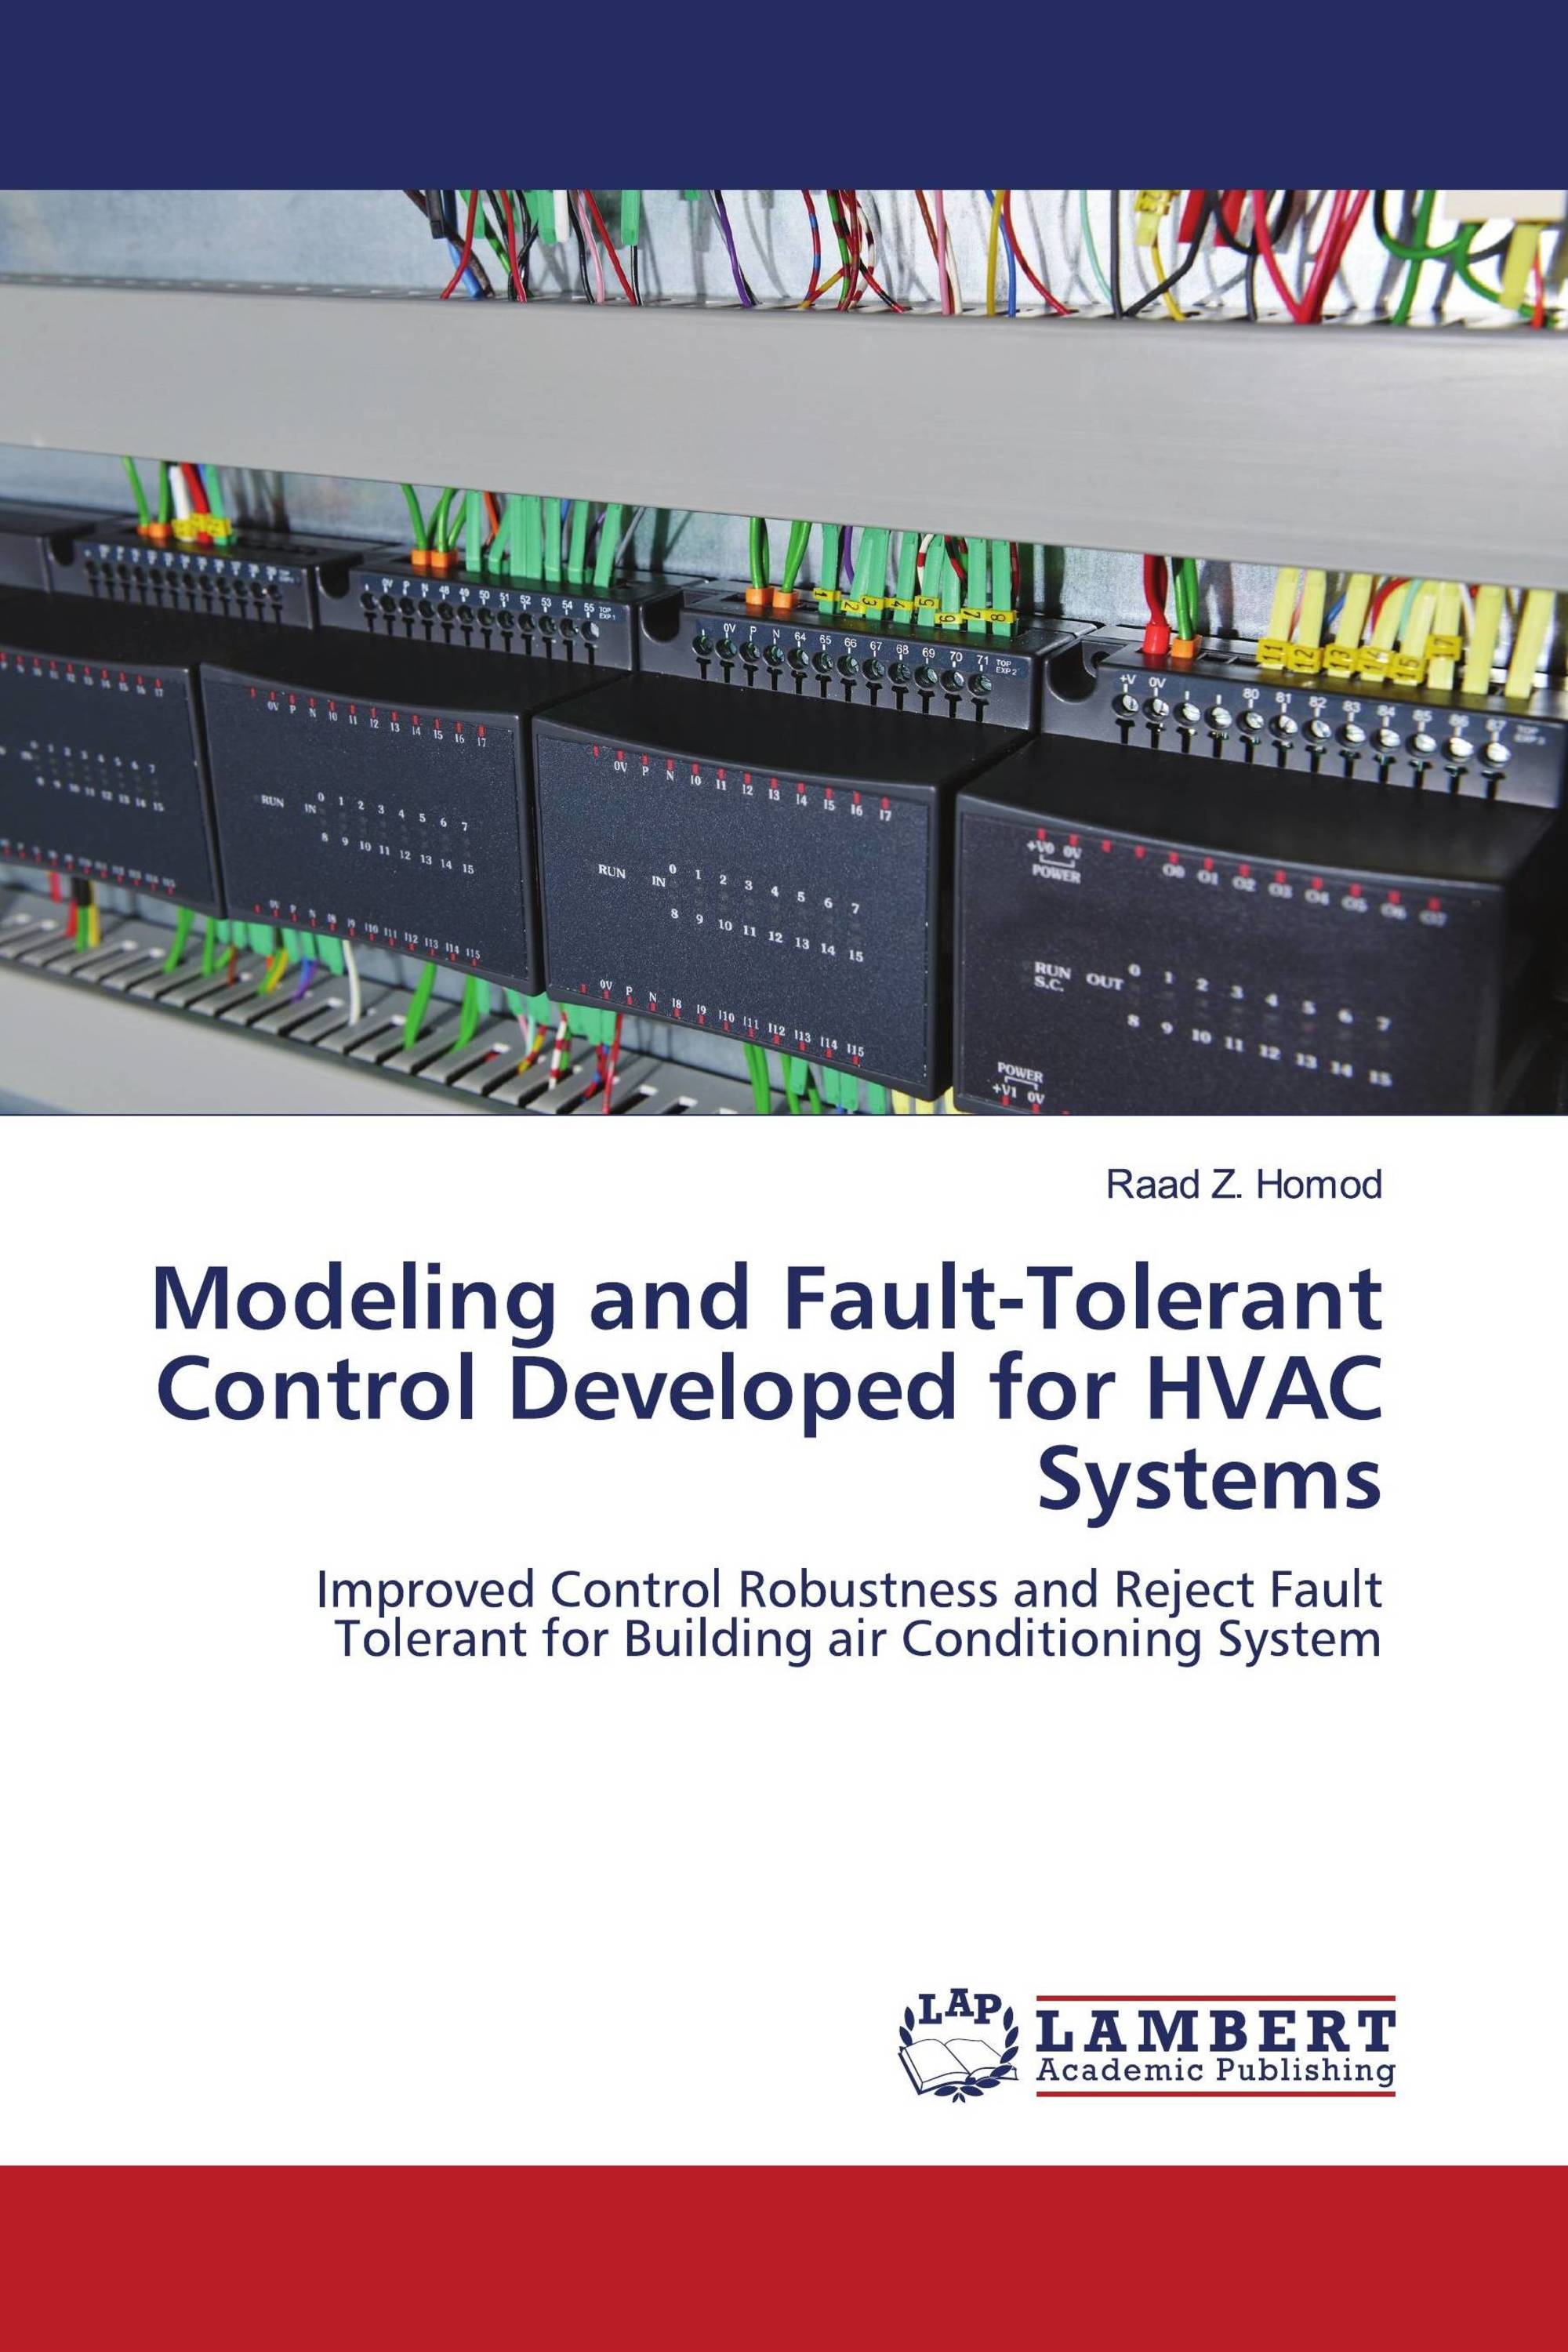 Modeling and Fault-Tolerant Control Developed for HVAC Systems